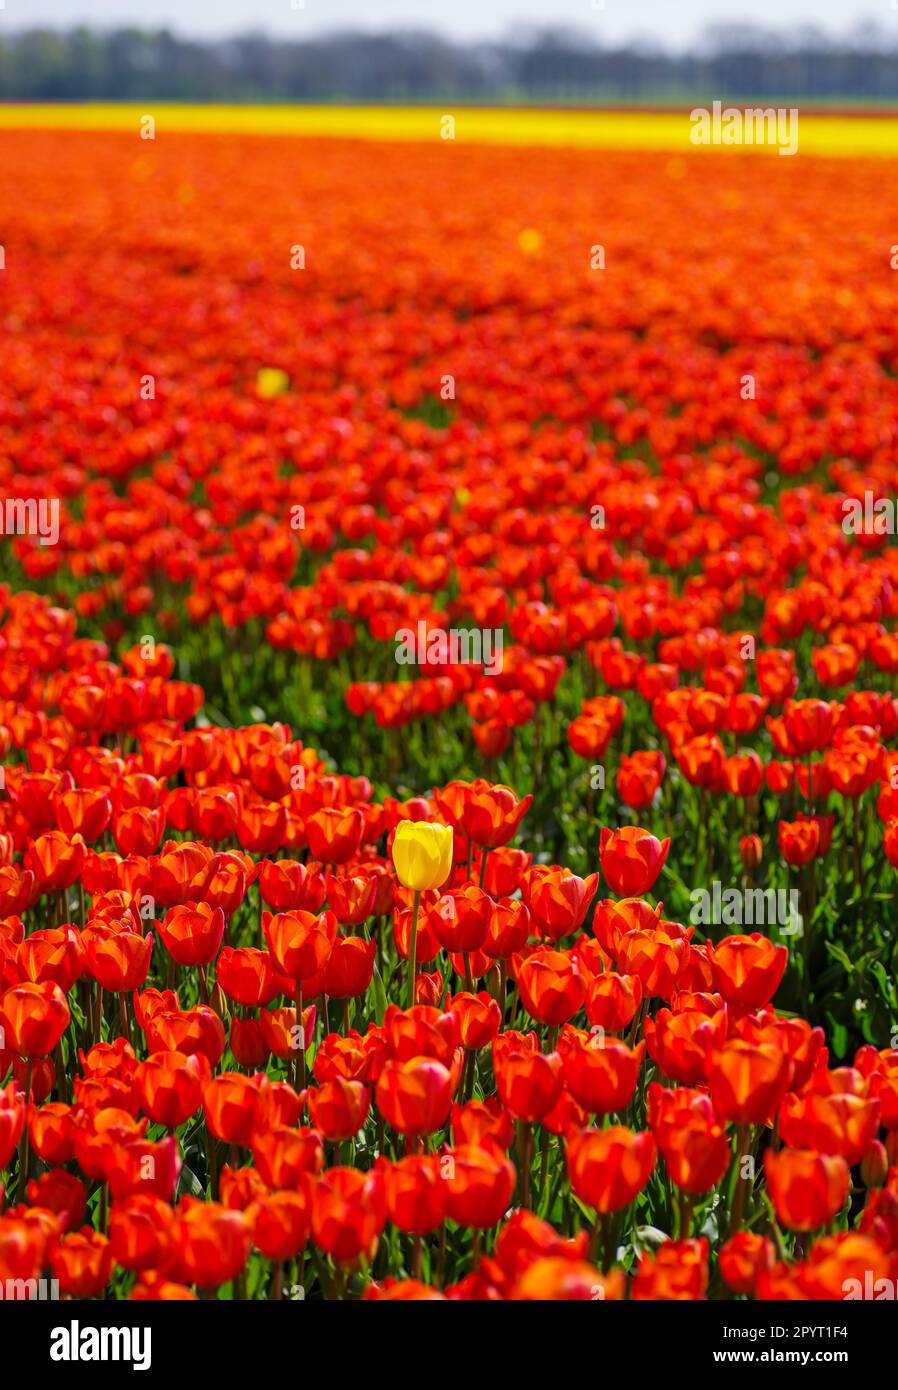 single yellow tulip in a field with red tulips Stock Photo